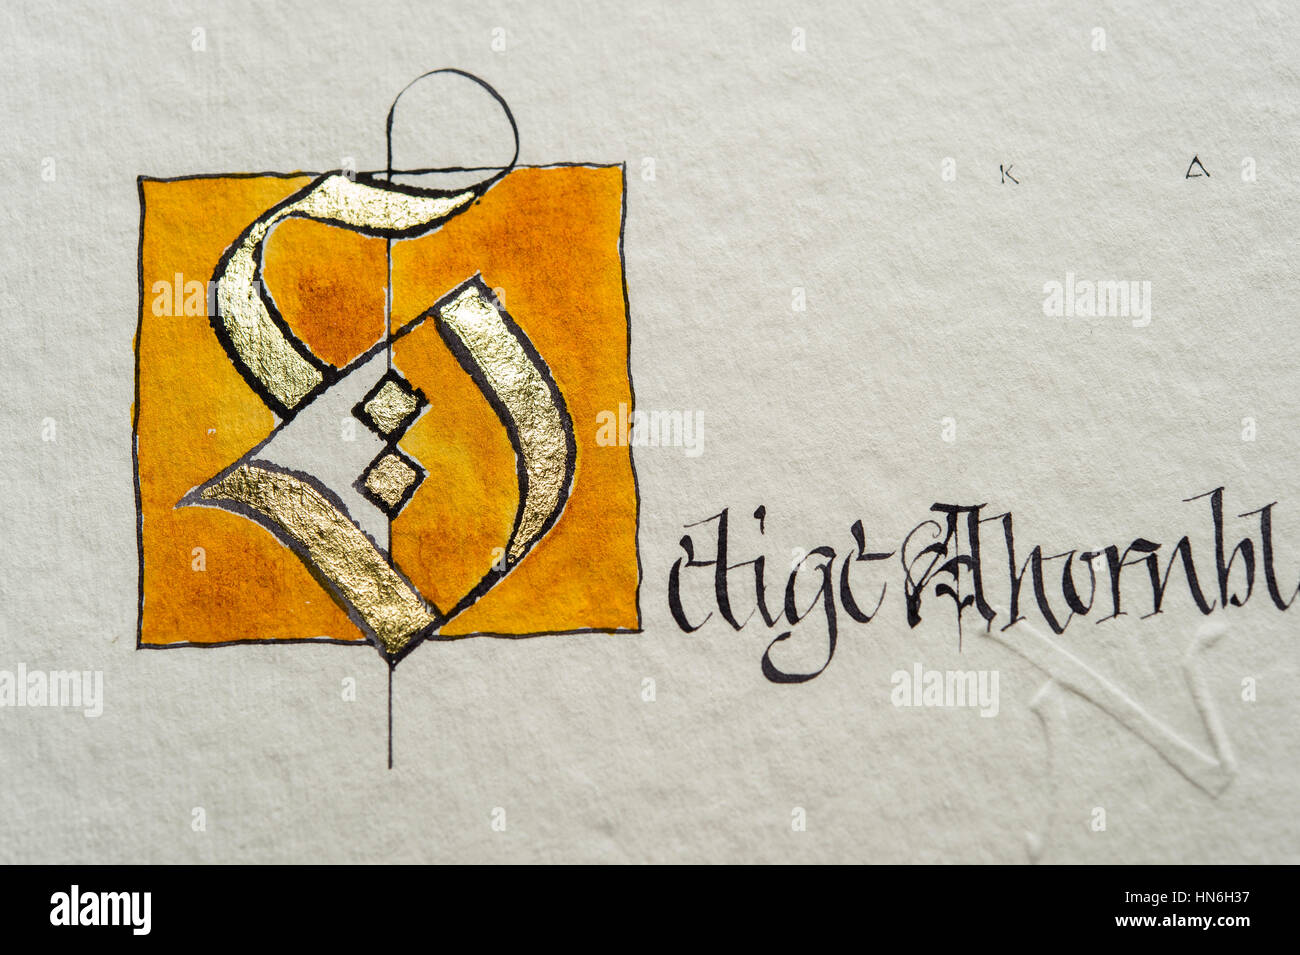 Calligraphy studio, letter S coated with gold and writing on torchon paper, Seebruck, Upper Bavaria, Germany Stock Photo